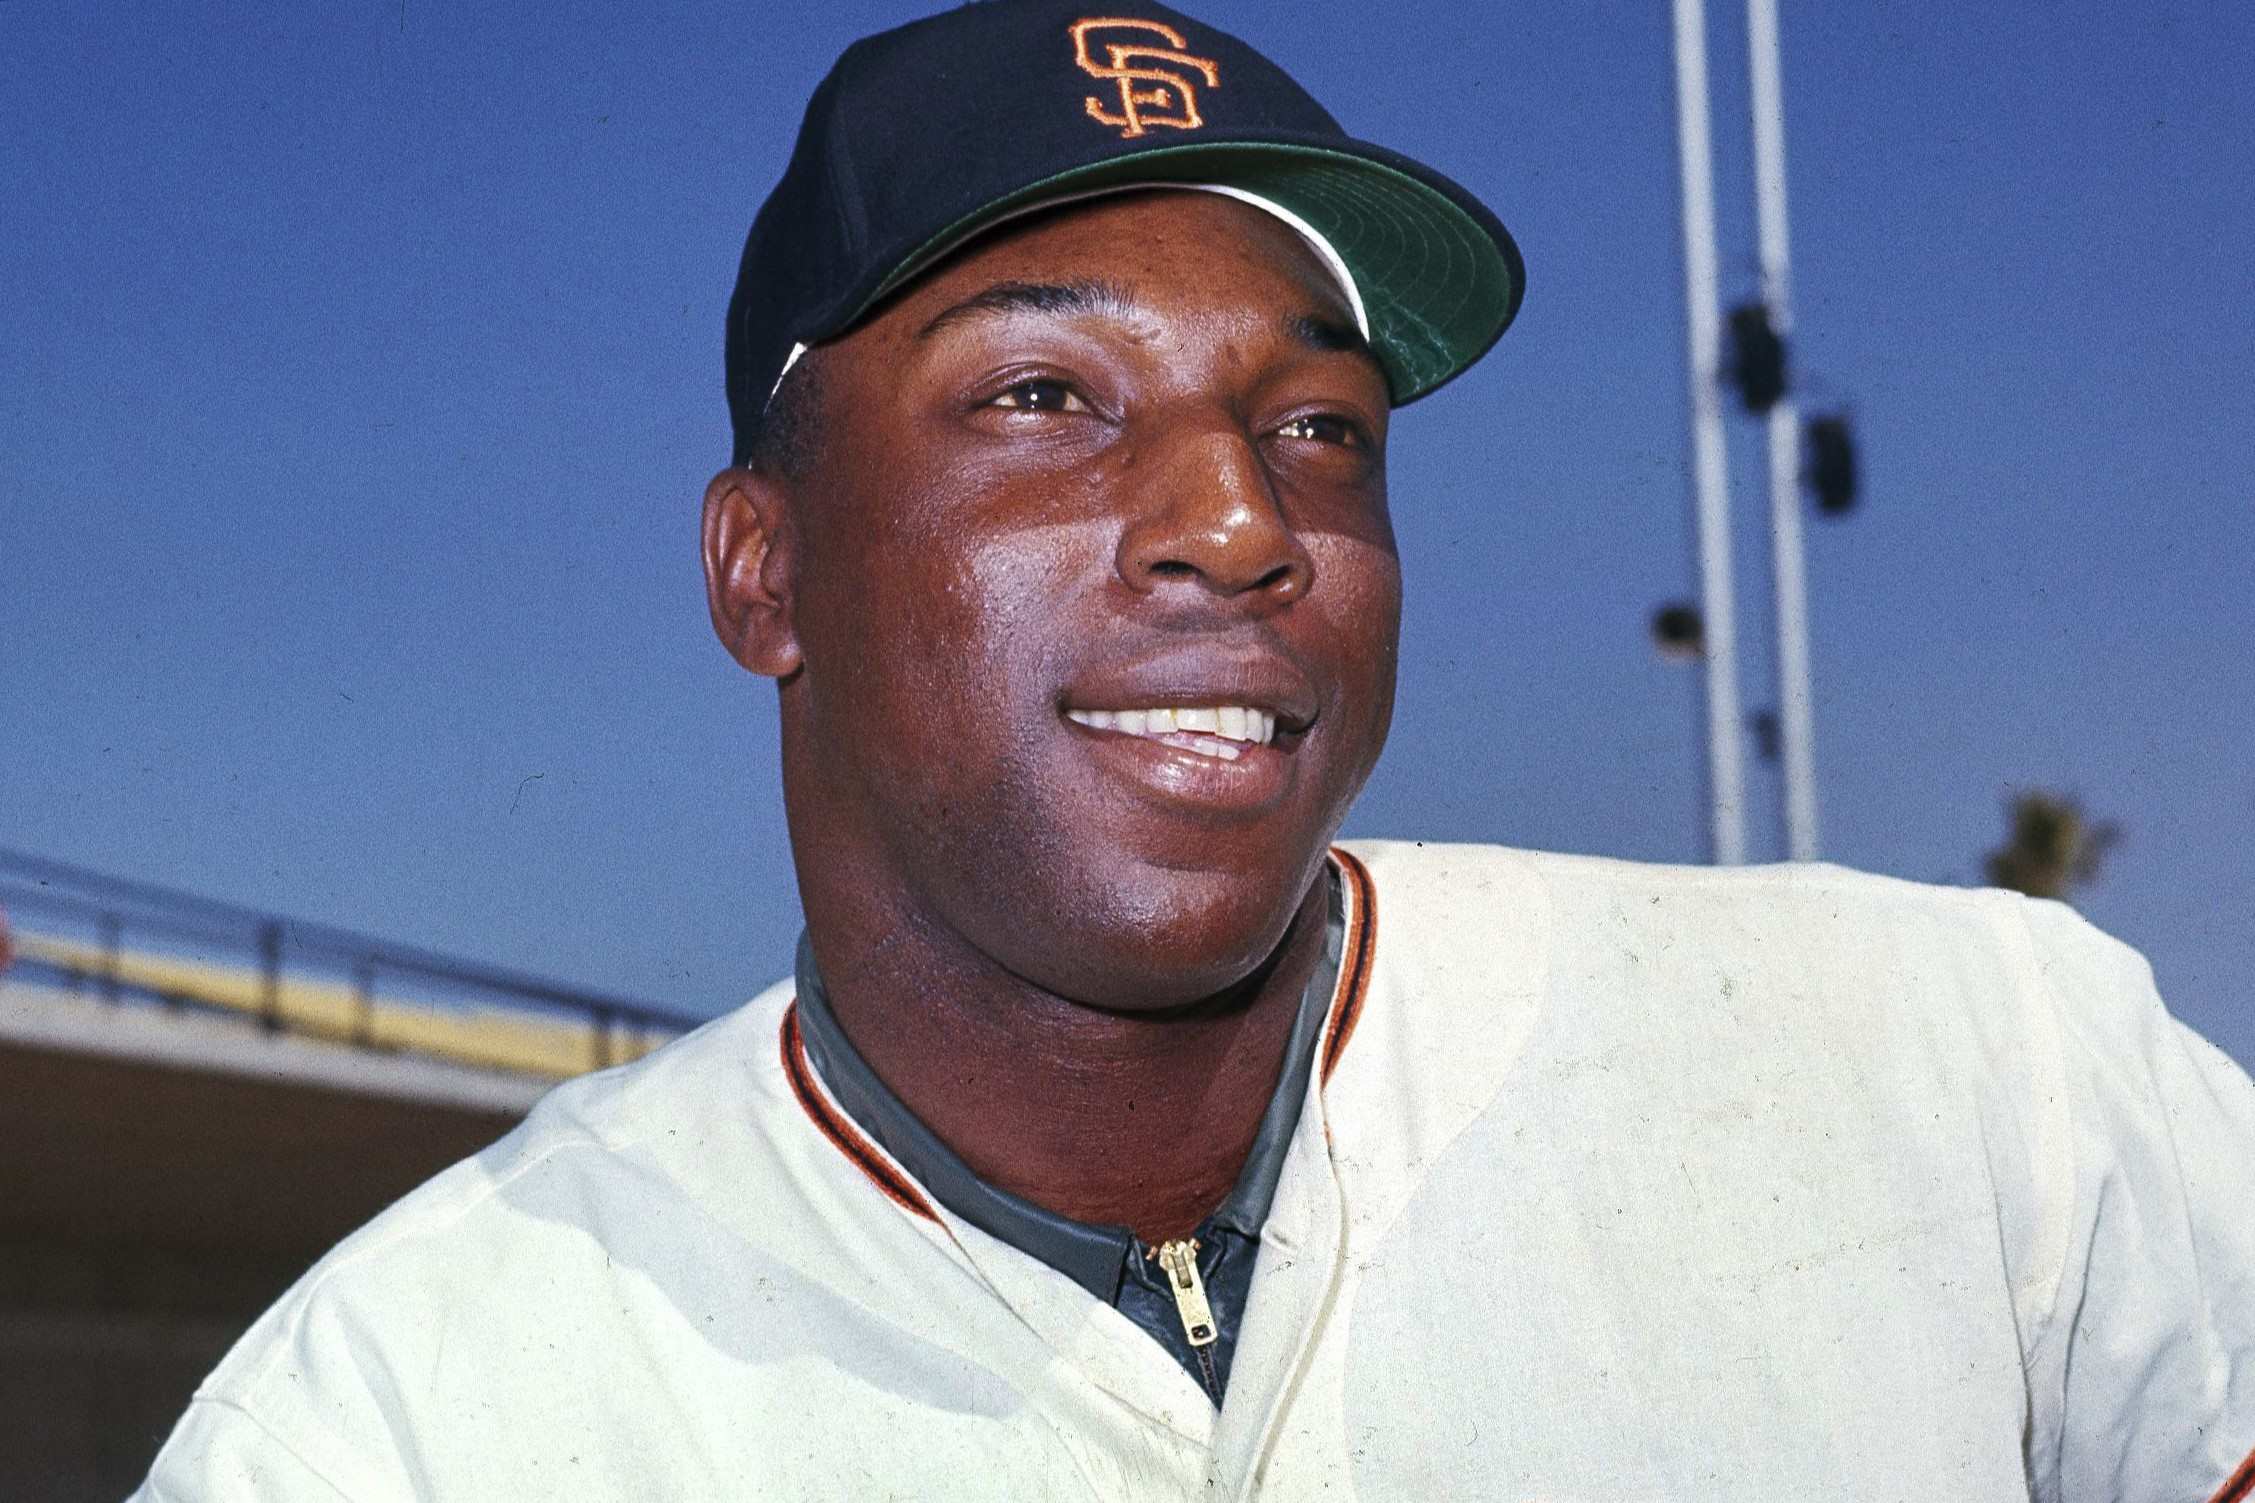 25-astonishing-facts-about-willie-mccovey